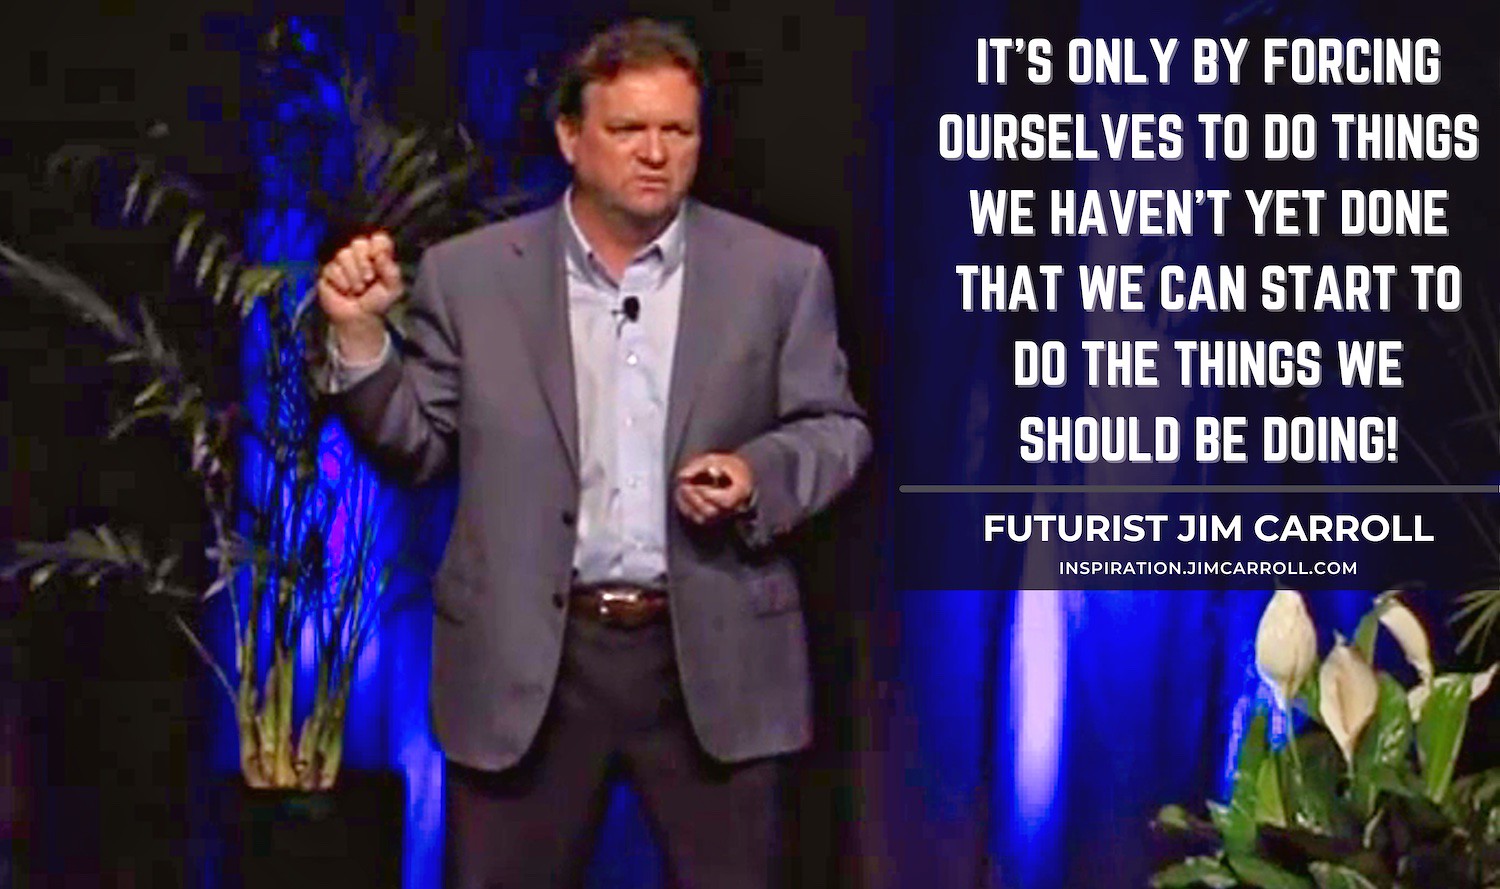 "It's only by forcing ourselves to do things we haven't yet done that we can start to do the things we should be doing!" - Futurist Jim Carroll